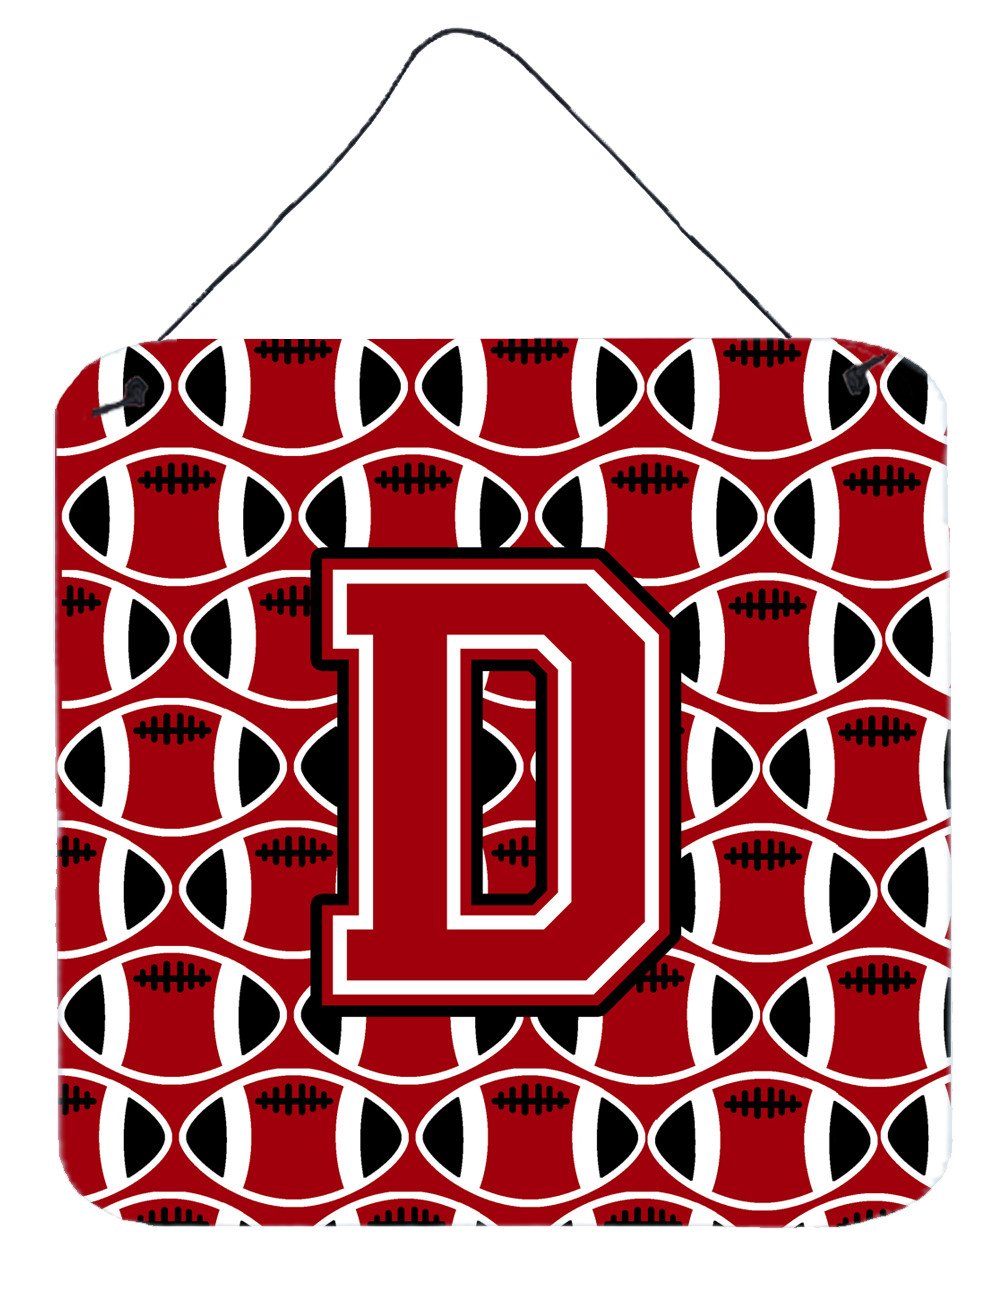 Letter D Football Red, Black and White Wall or Door Hanging Prints CJ1073-DDS66 by Caroline's Treasures